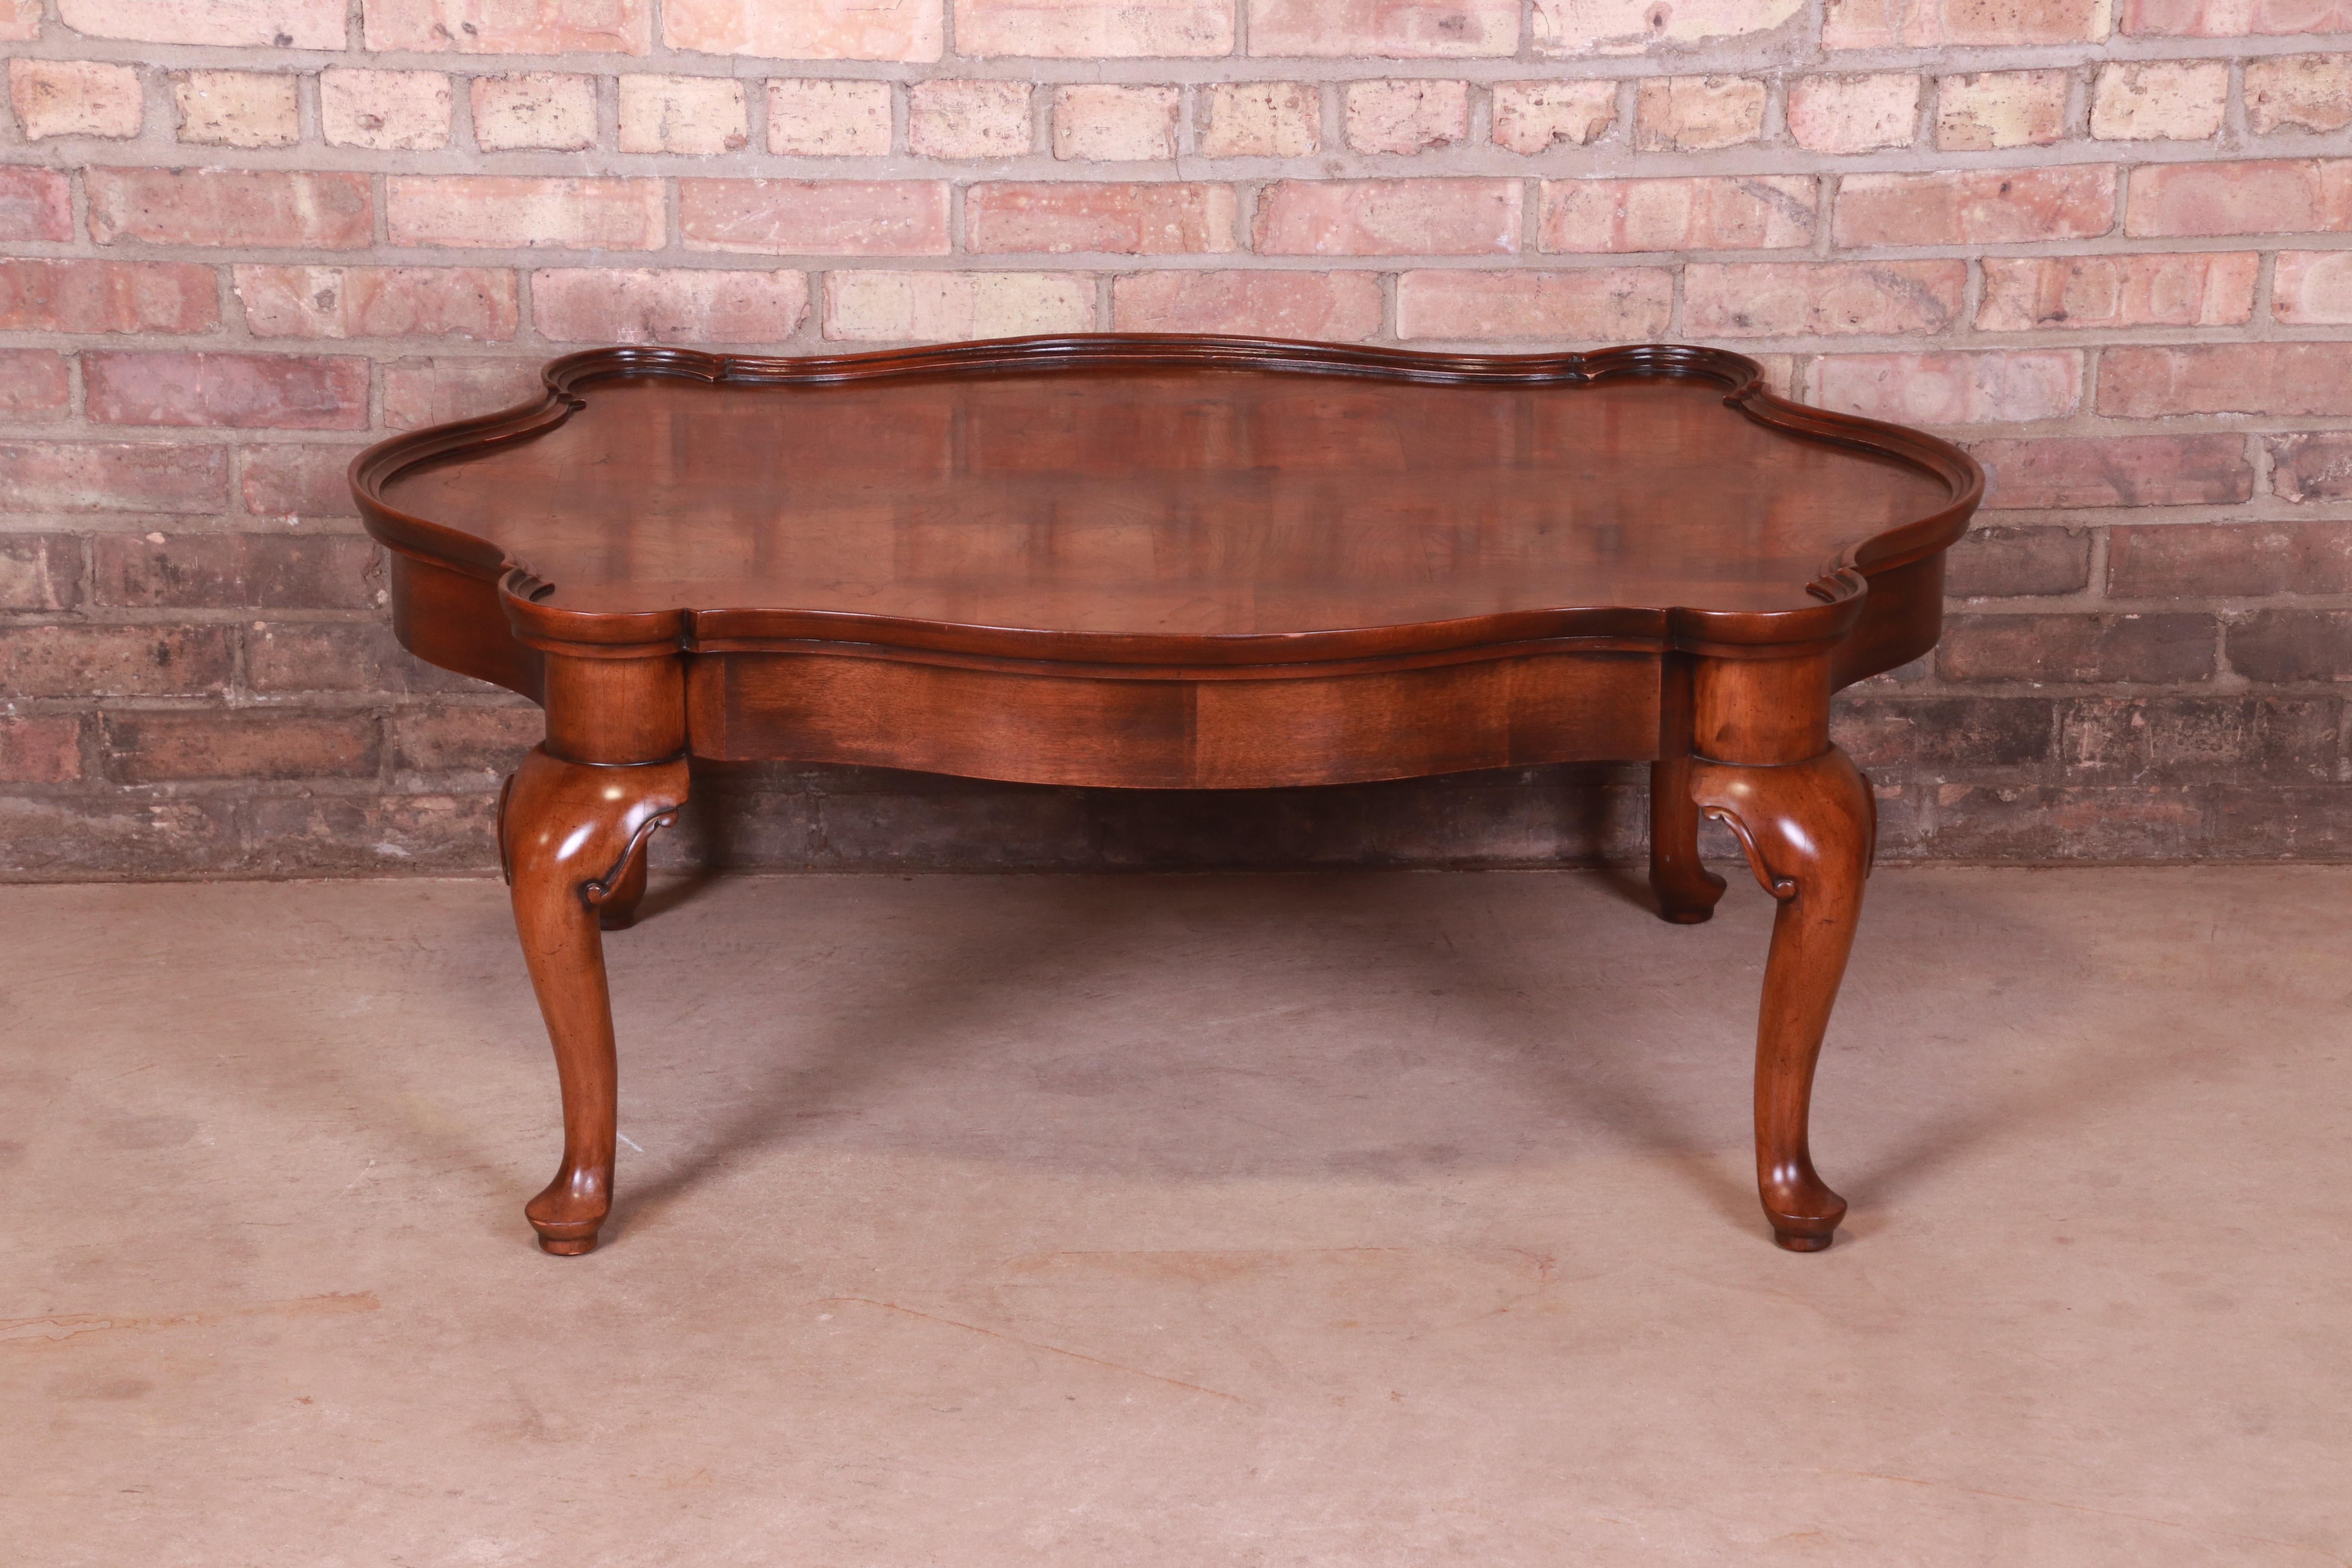 A gorgeous French Provincial Louis XV style coffee table

Attributed to Baker Furniture

Circa 1980s

Carved mahogany, with inlaid patchwork burled walnut top.

Measures: 43.25